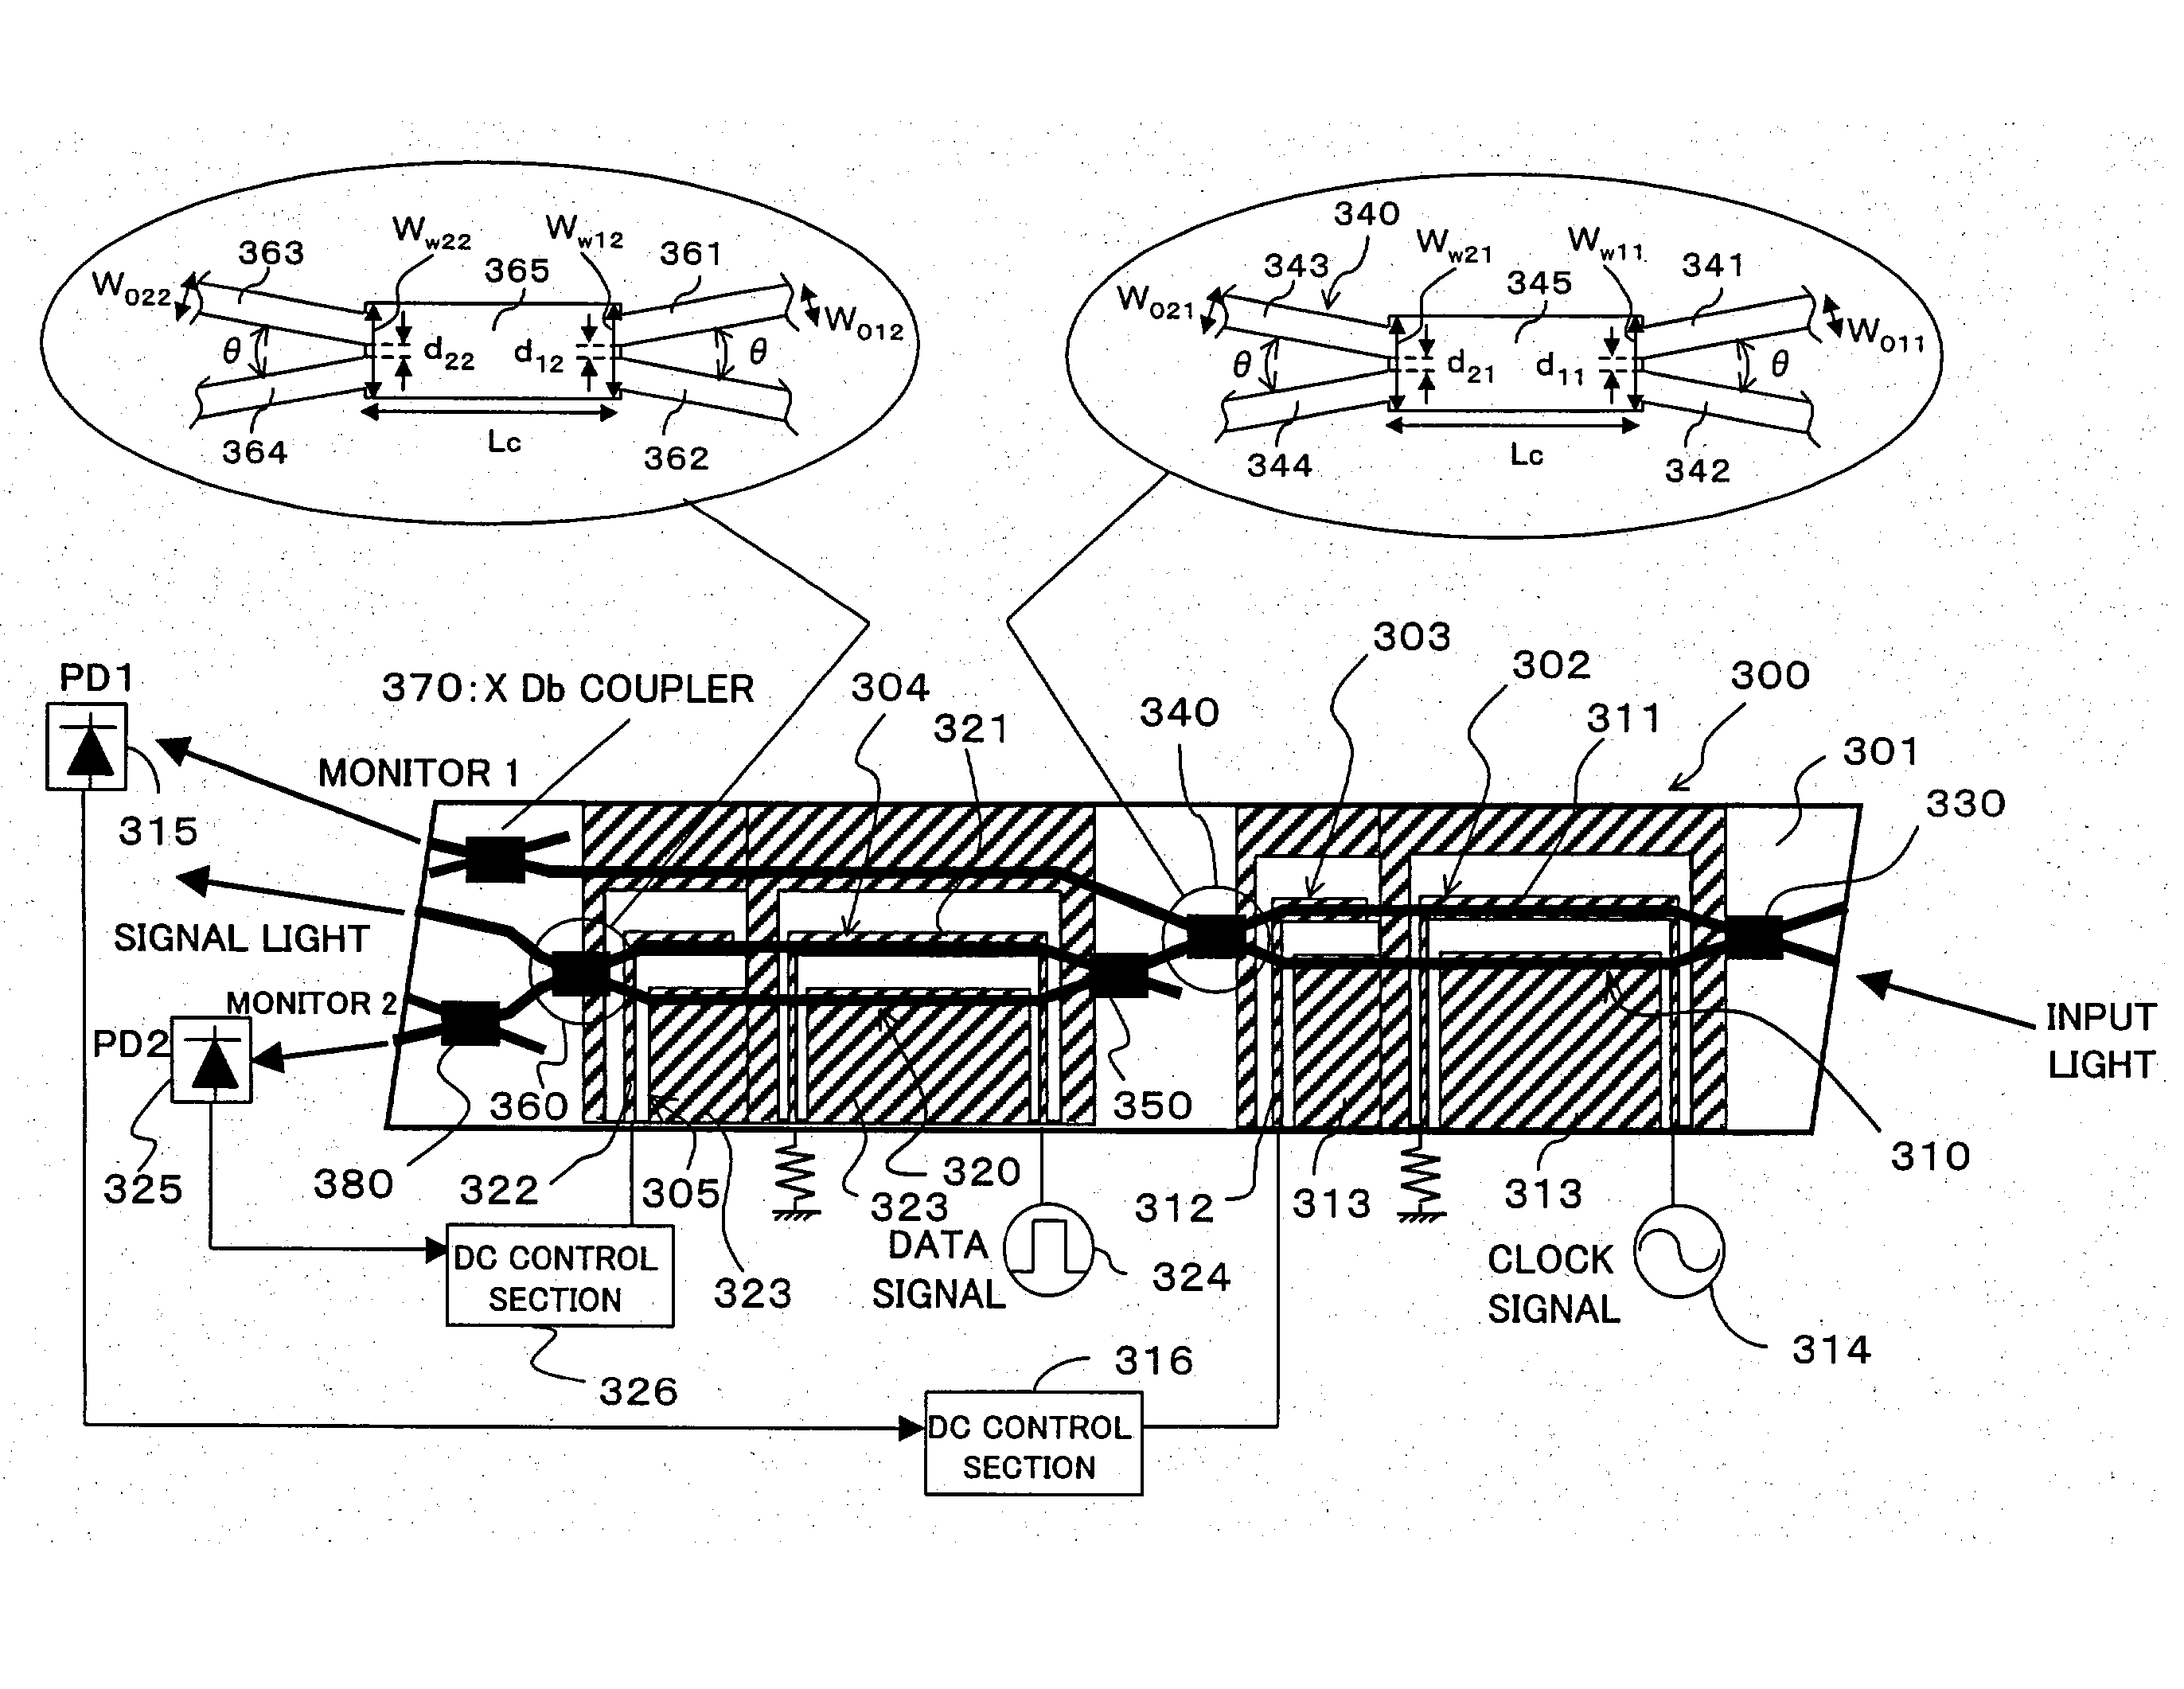 Optical modulator, optical waveguide device and acousto-optic tunable filter apparatus